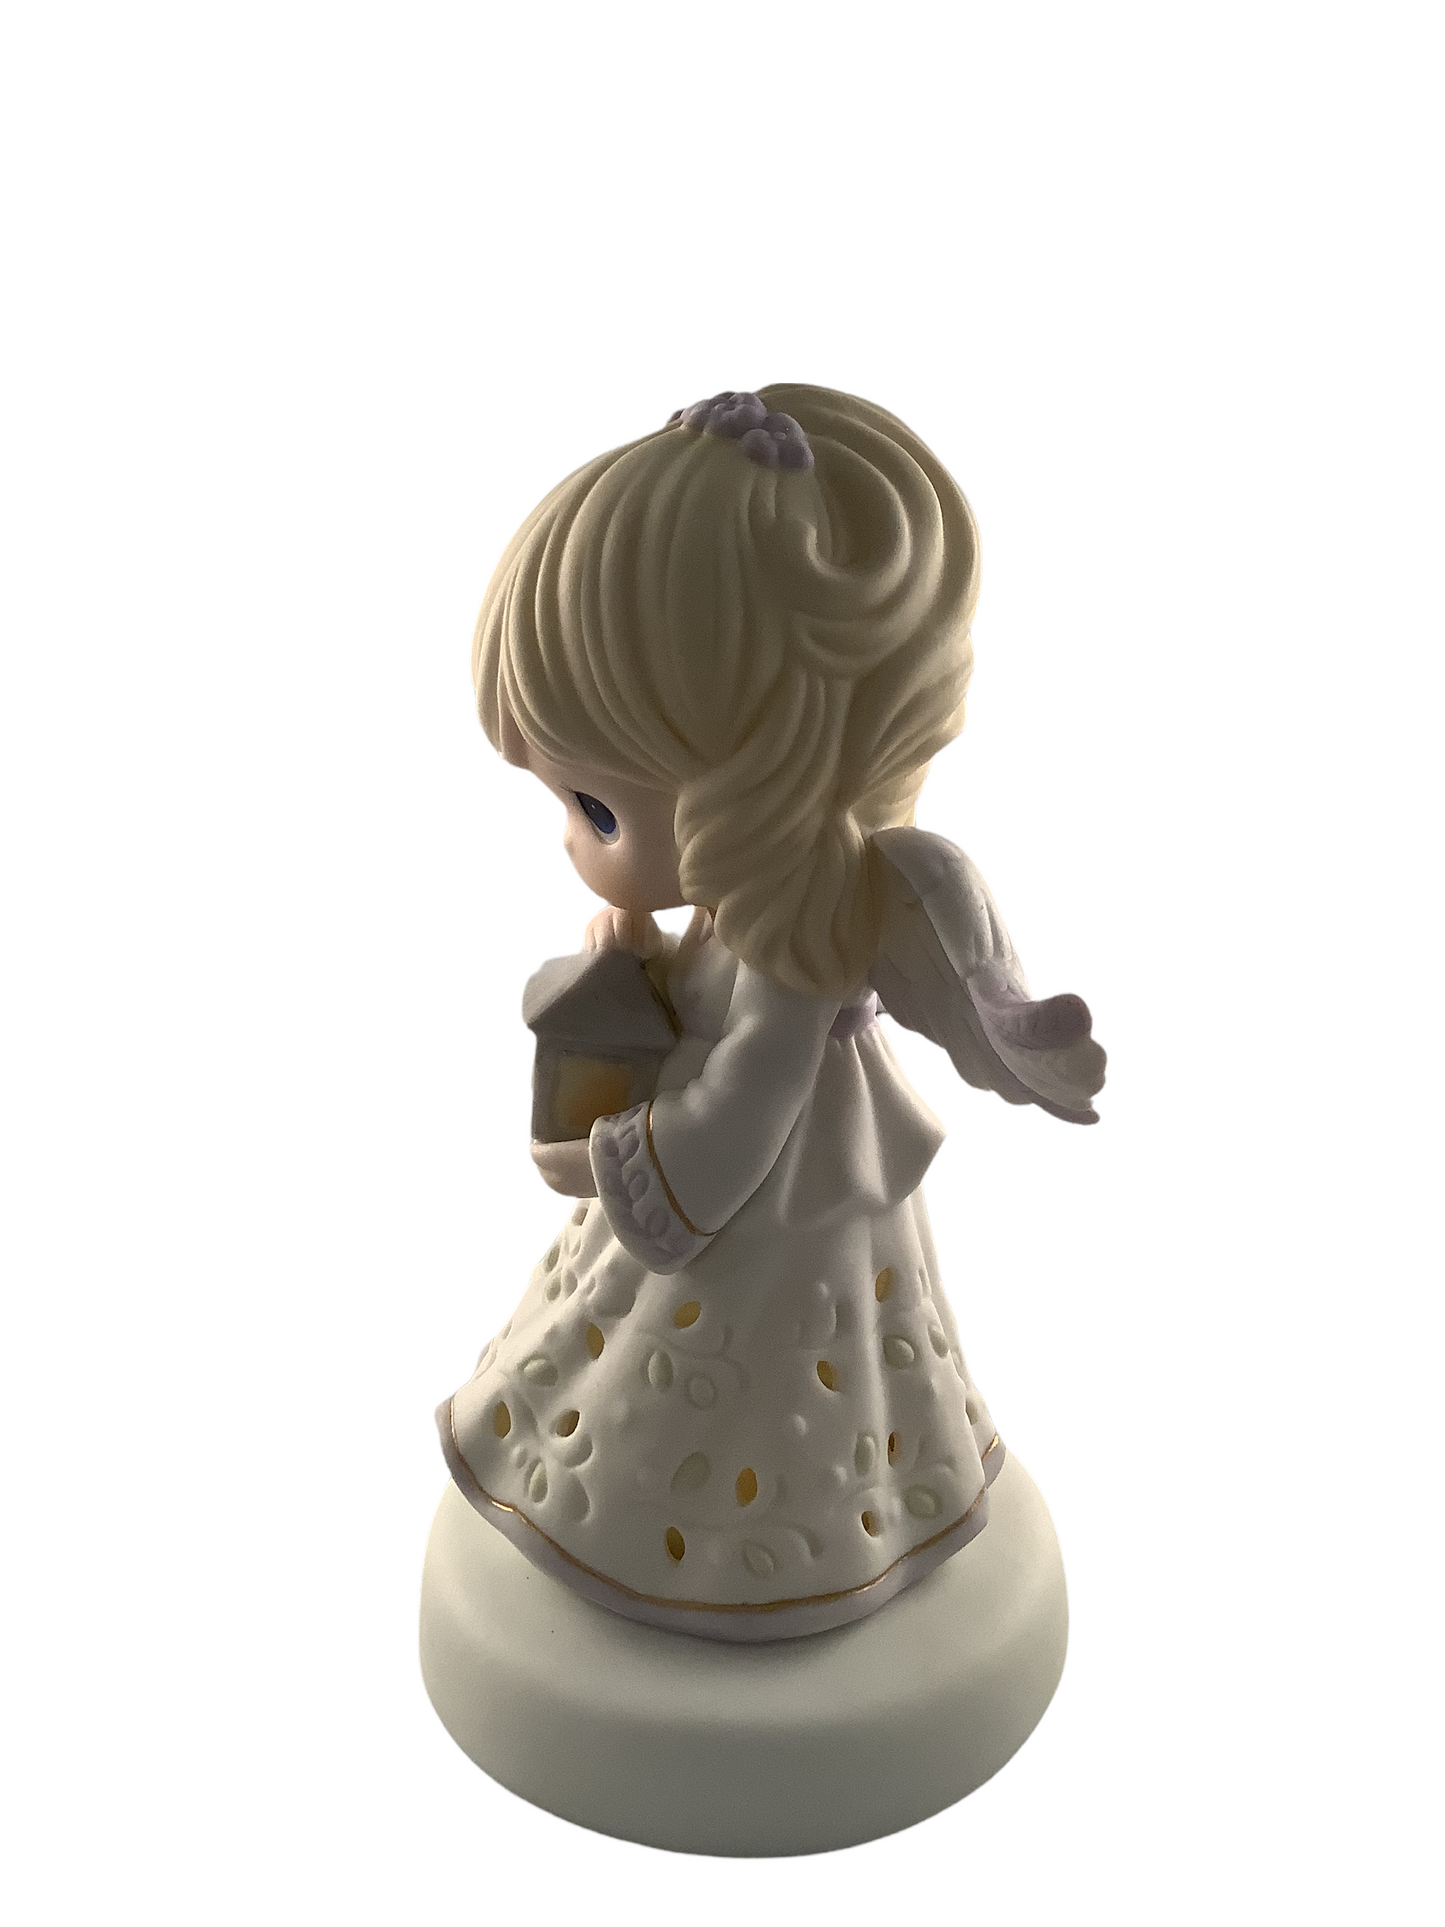 Bright Is The Path Of The Faithful - Precious Moment Figurine